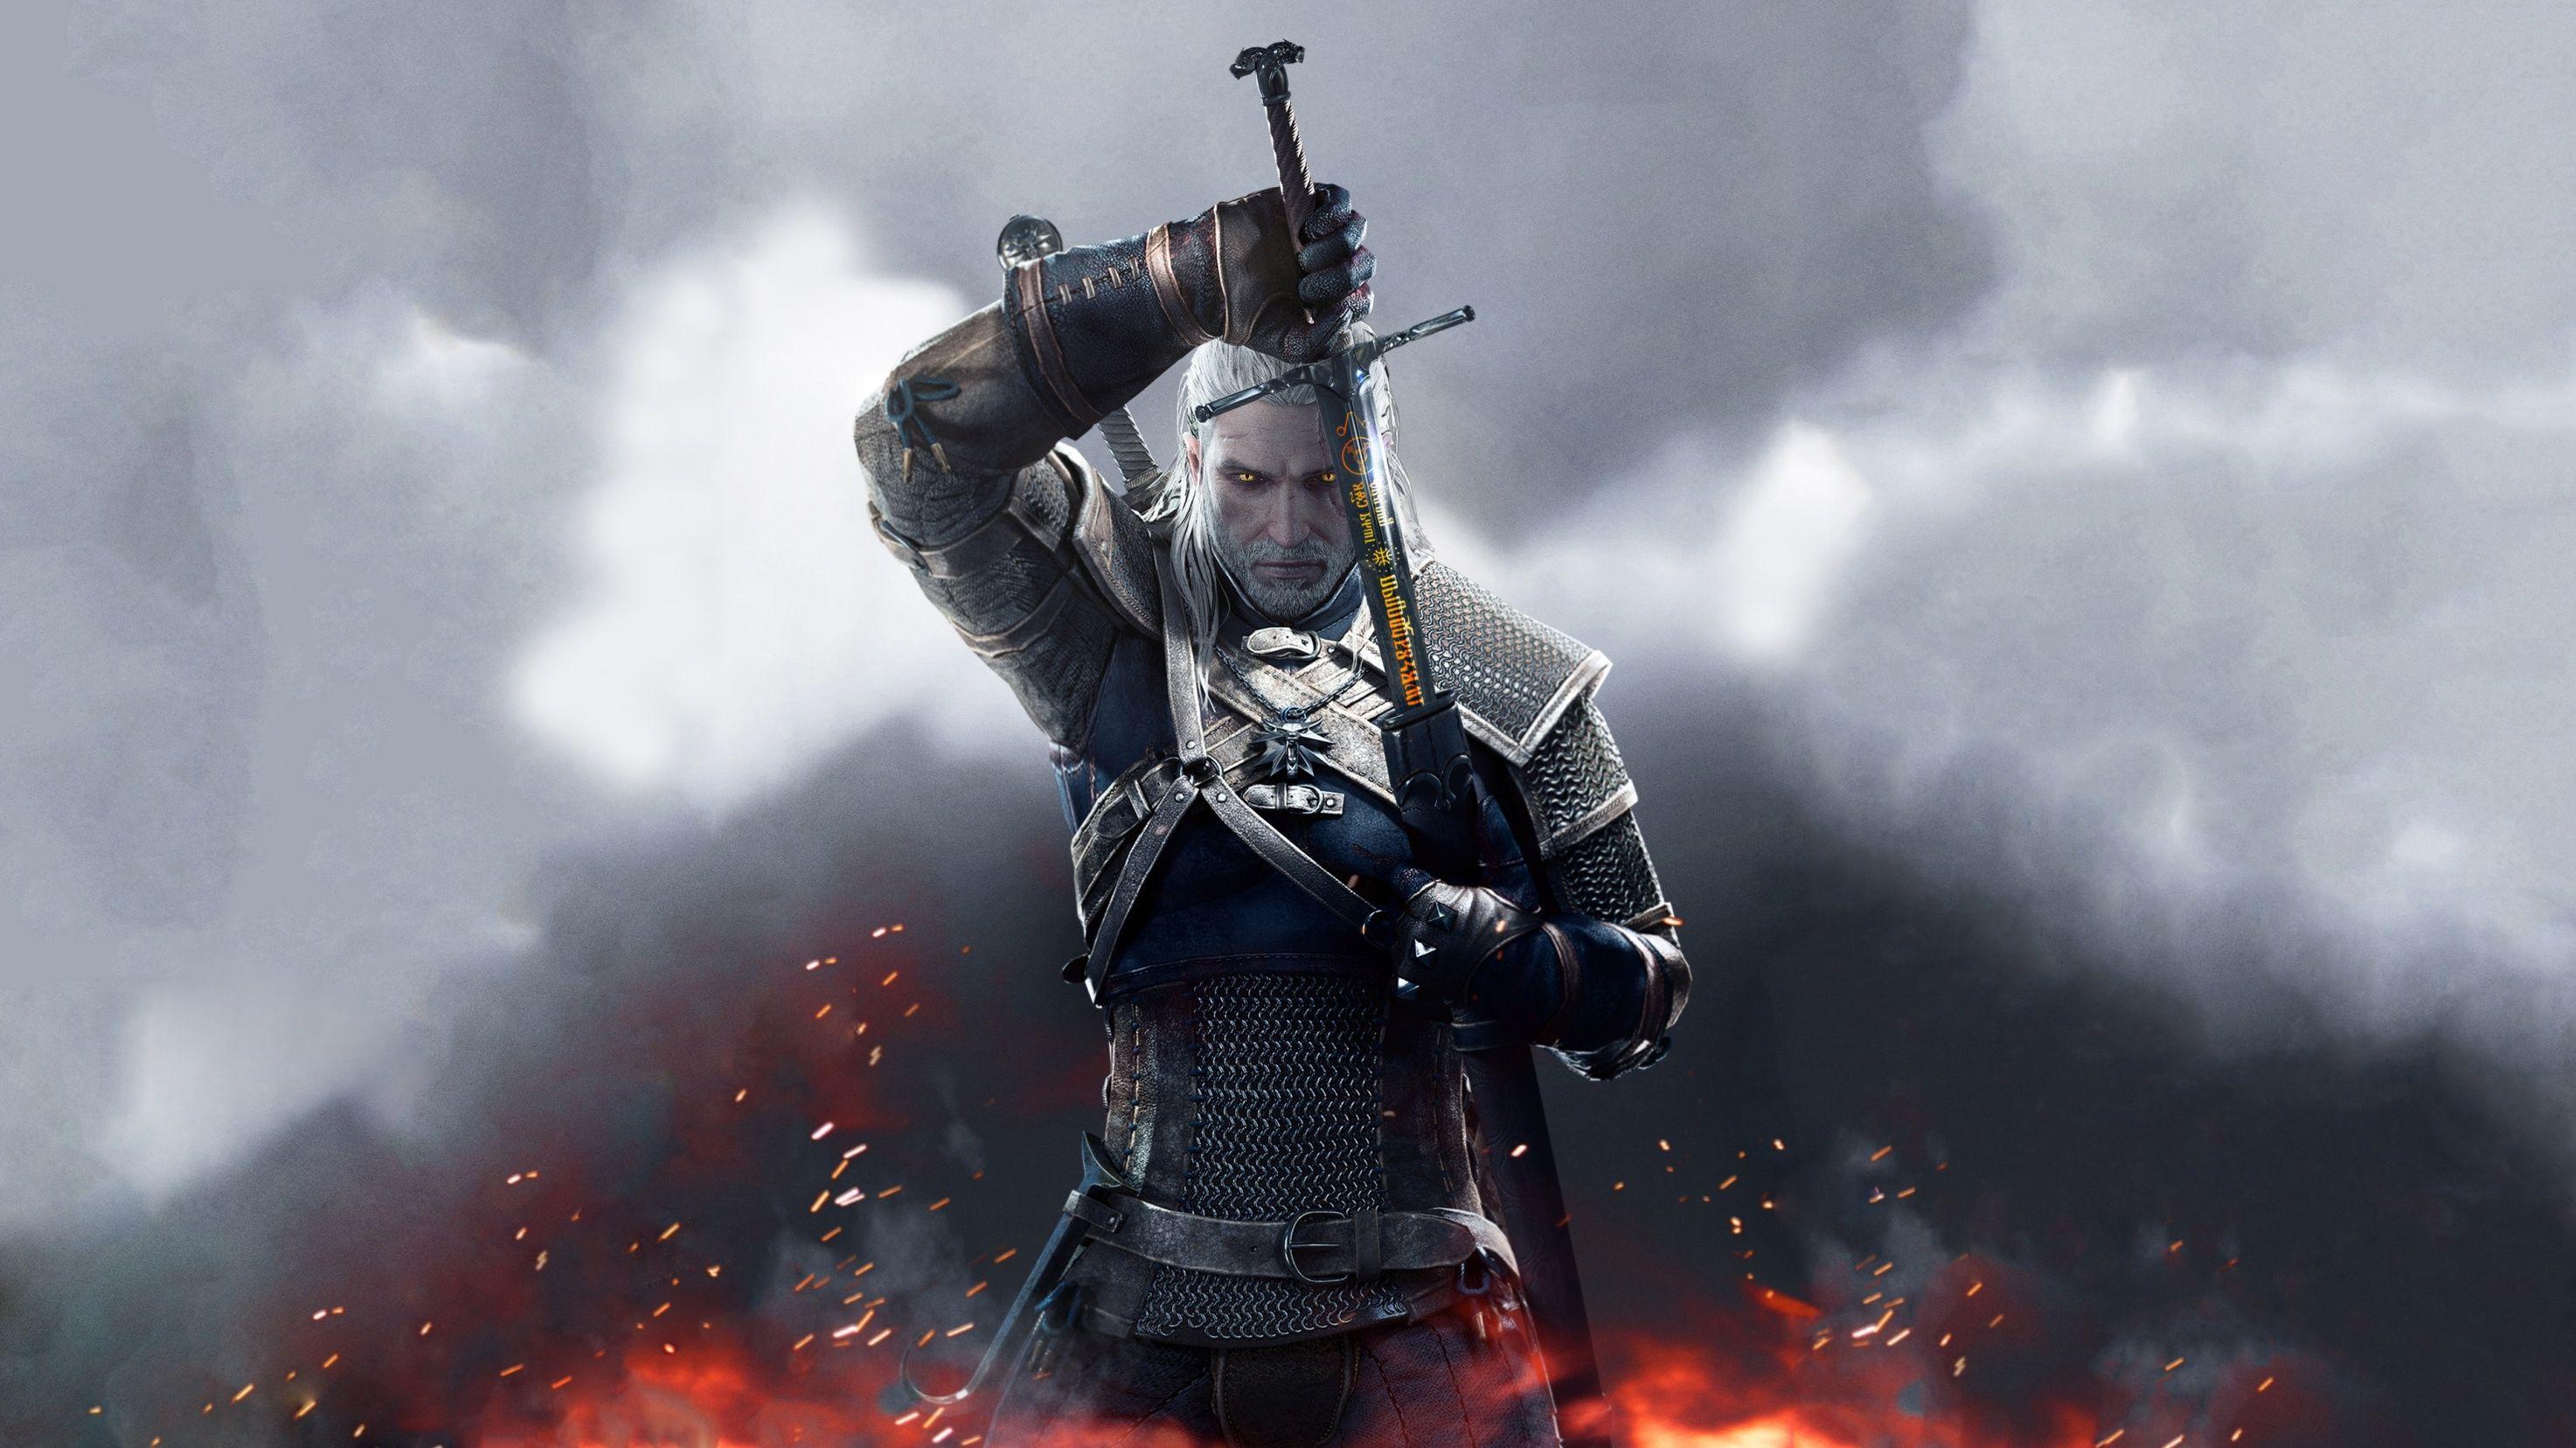 The Witcher 3: Wild Hunt image Geralt HD wallpaper and background